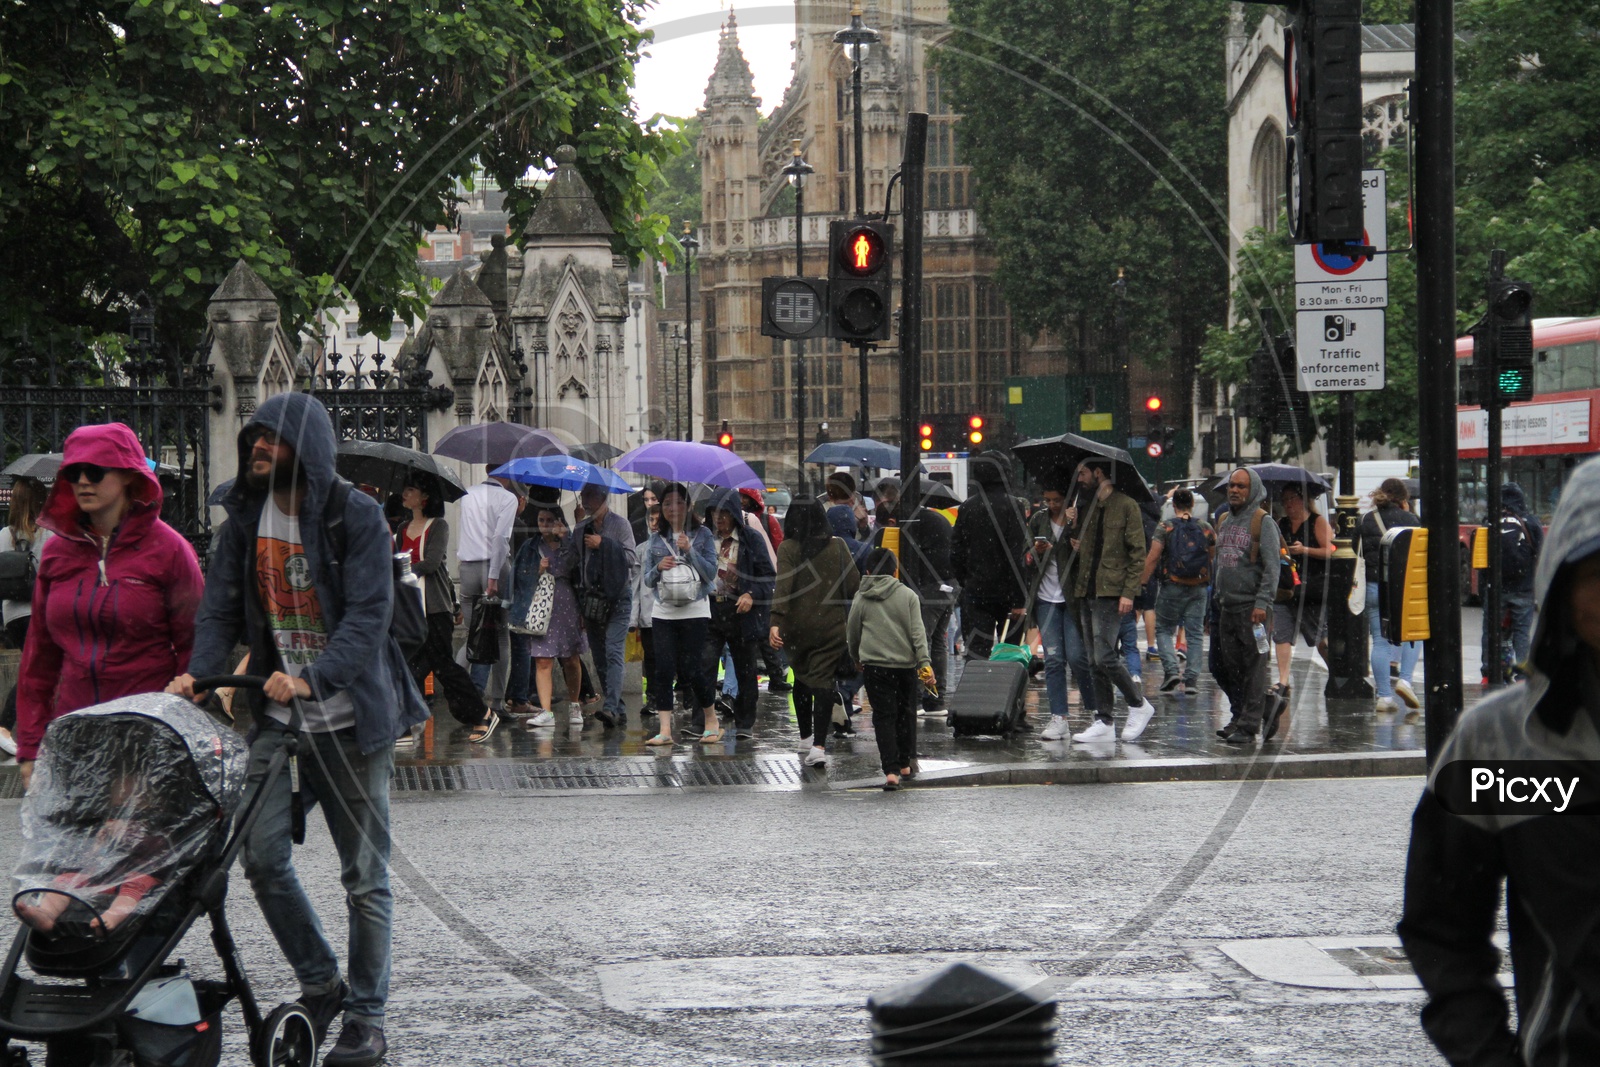 People walking on Footpath on a Rainy Day